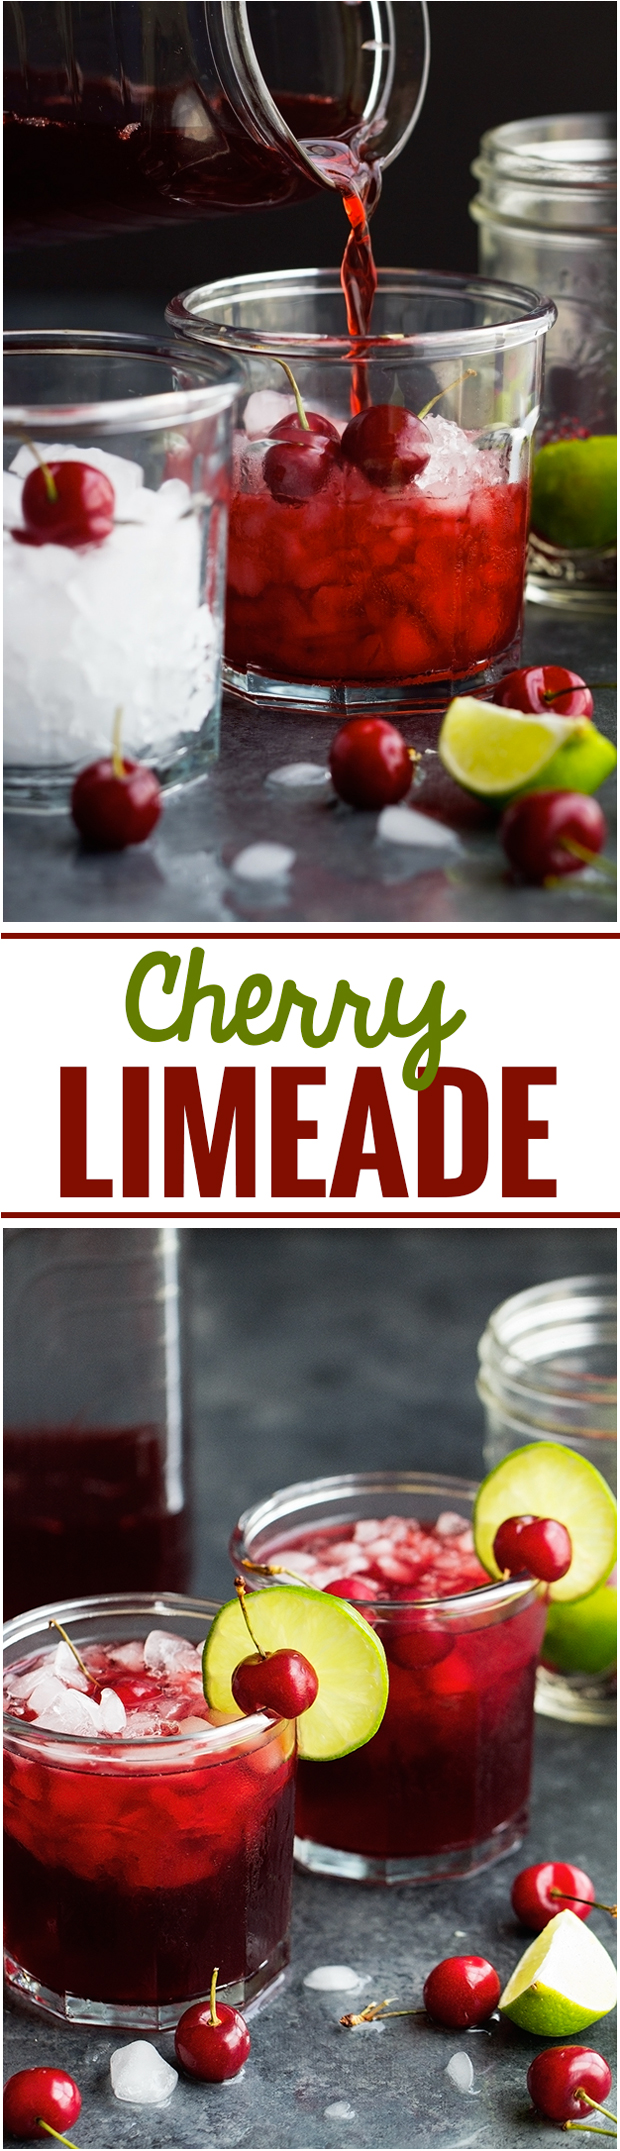 Cherry Limeade - Simple, bright, and refreshing. Perfect for summer days and takes just 5 minute to make! #cherrylimeade #limeade #lemonade | Littlespicejar.com